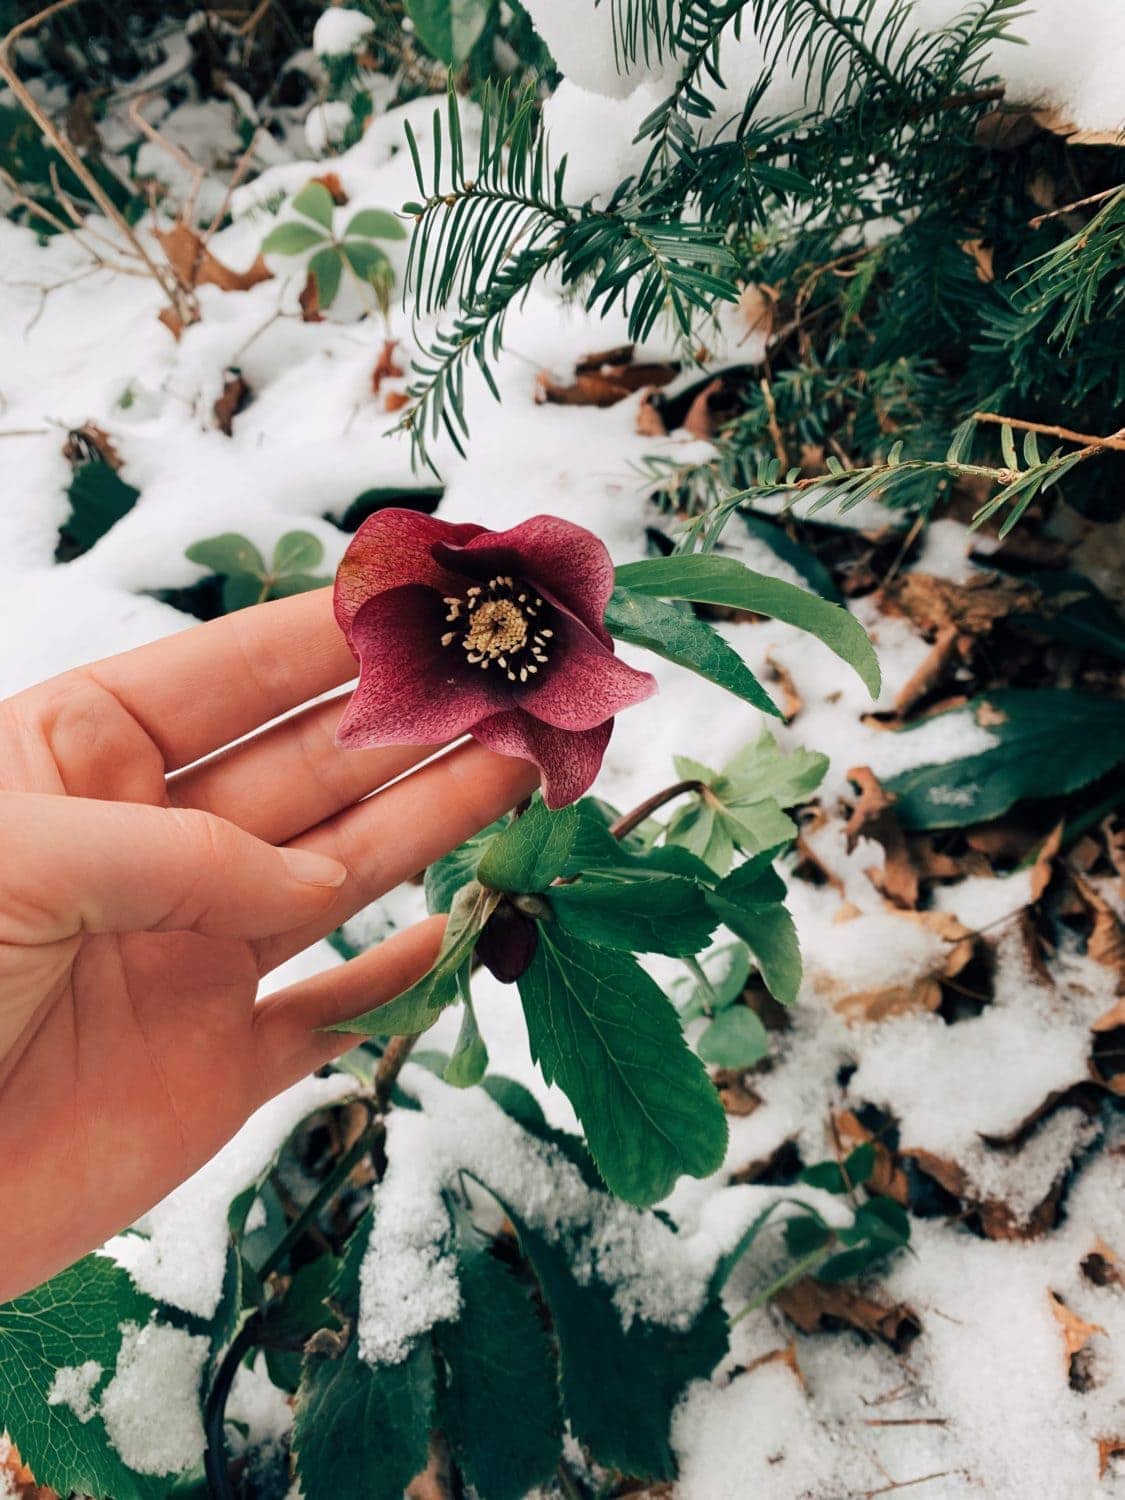 A hellebore in the snow